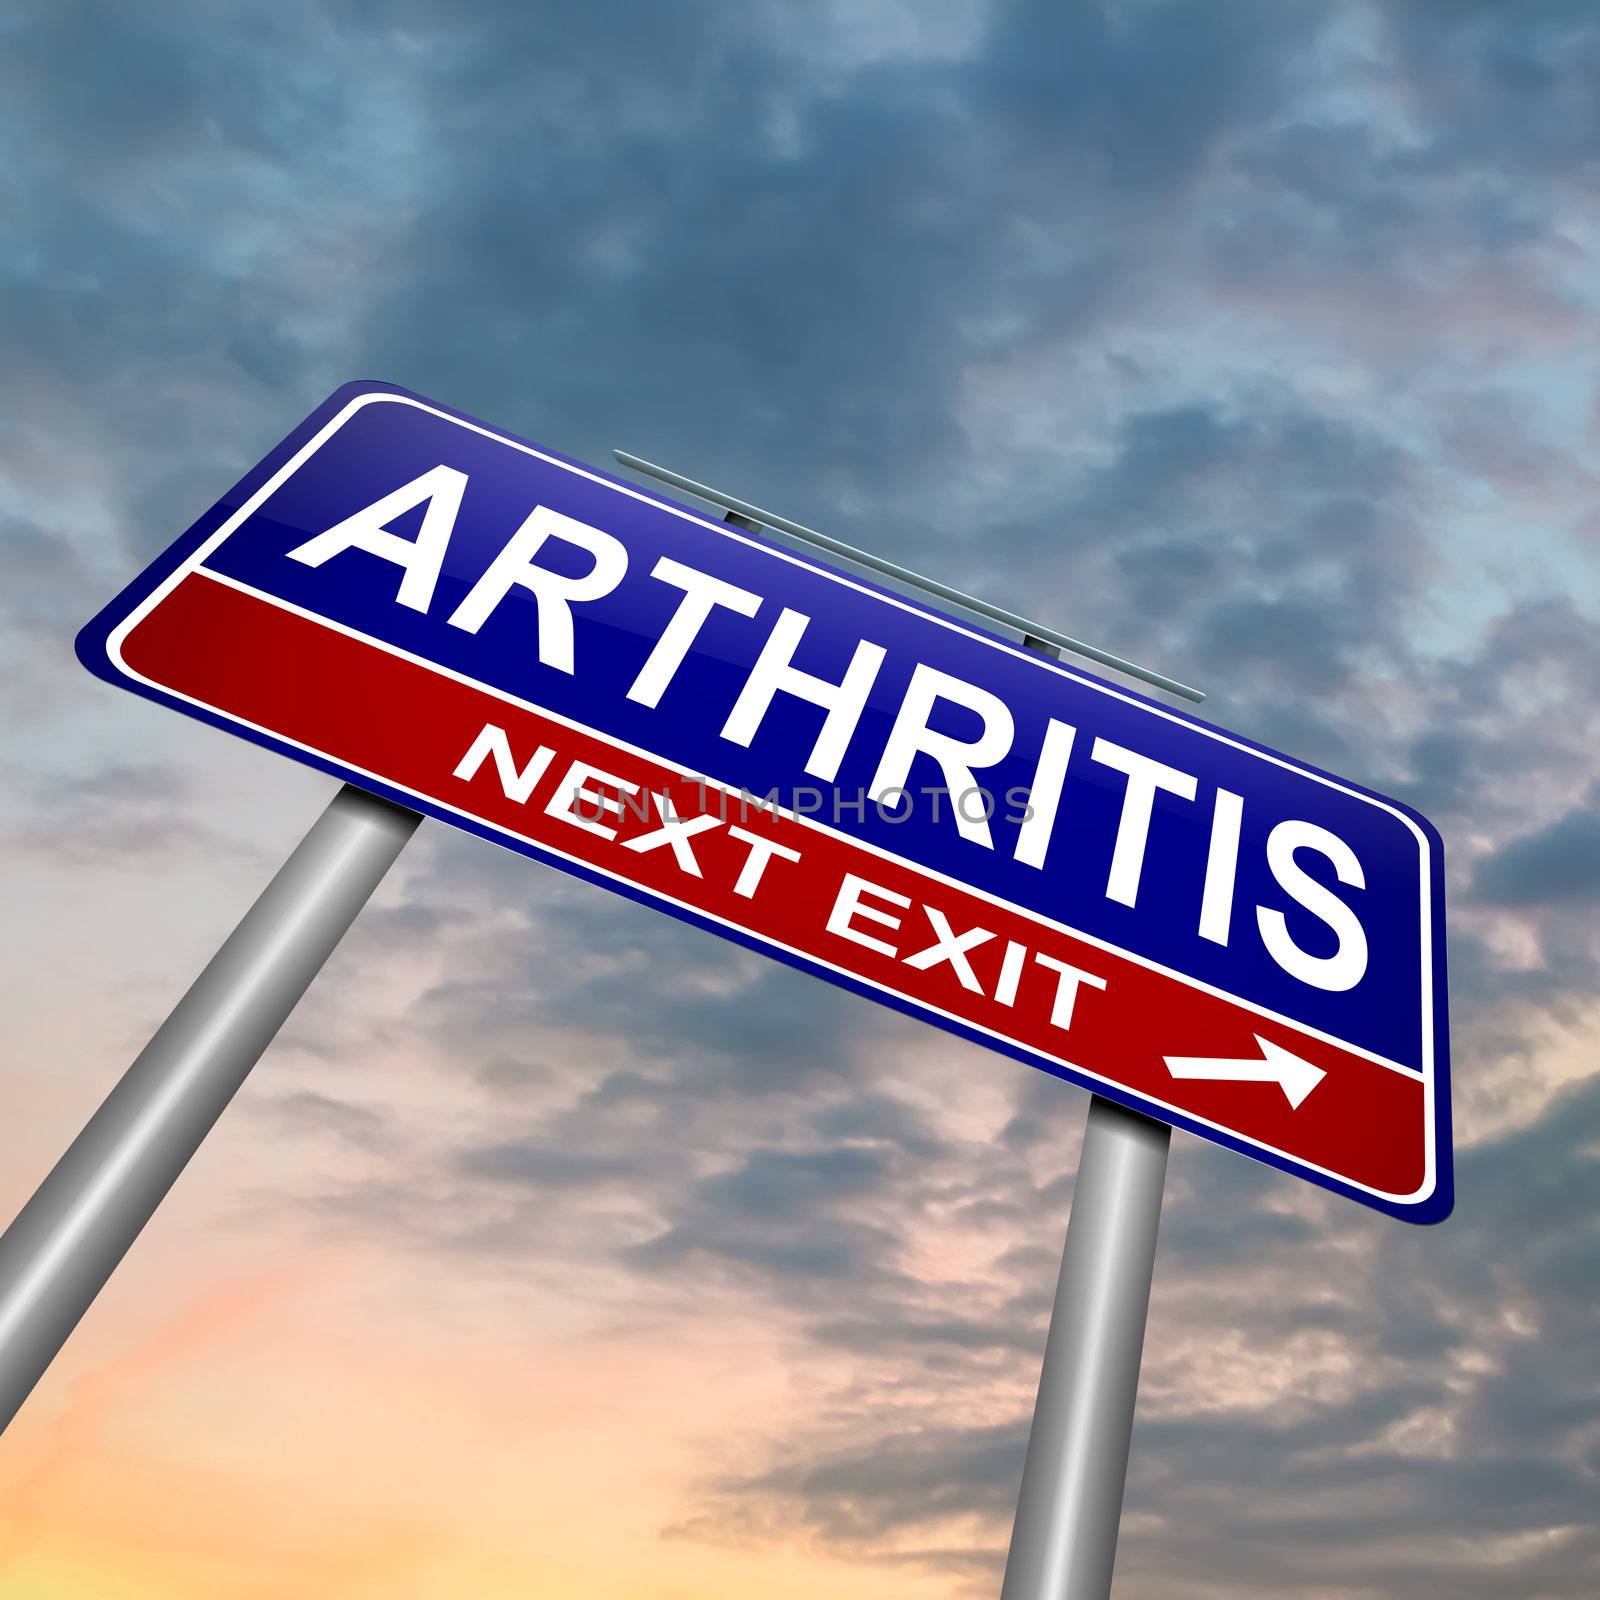 Illustration depicting a roadsign with an arthritis concept. Dusk sky background.